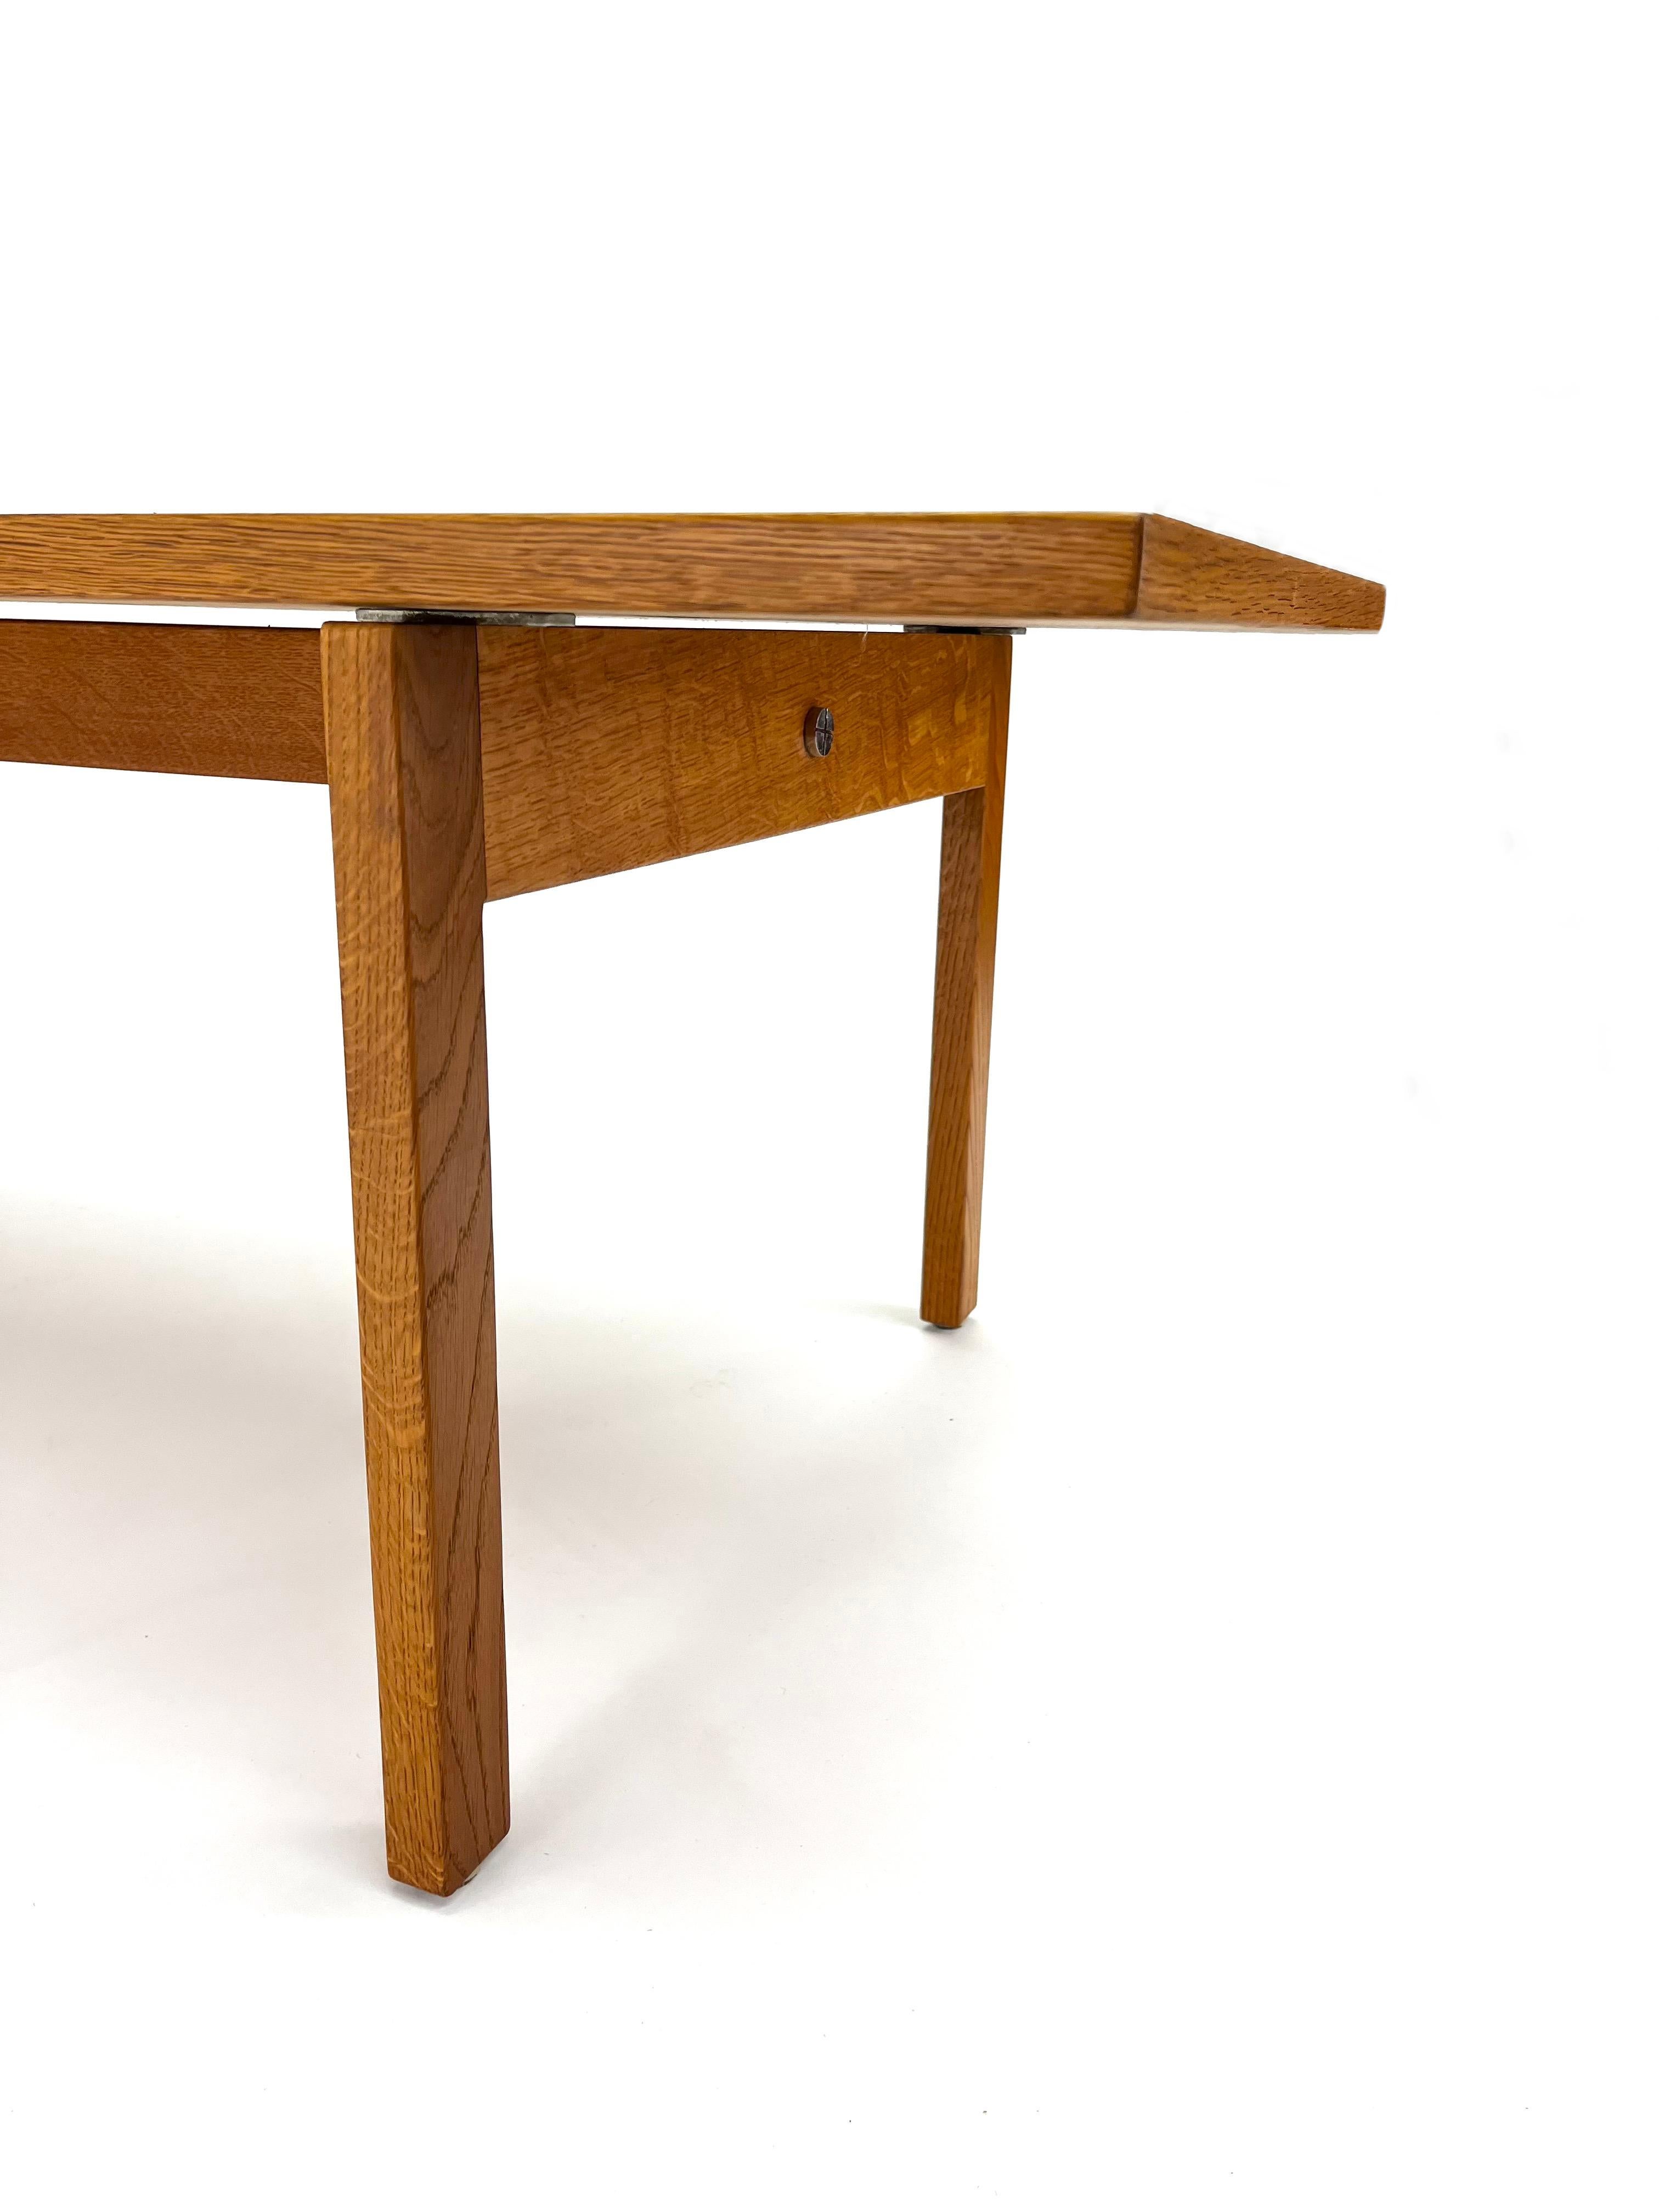 Hans Wegner for Andreas Tuck Oak Coffee Table, Model AT-15 In Excellent Condition For Sale In San Diego, CA